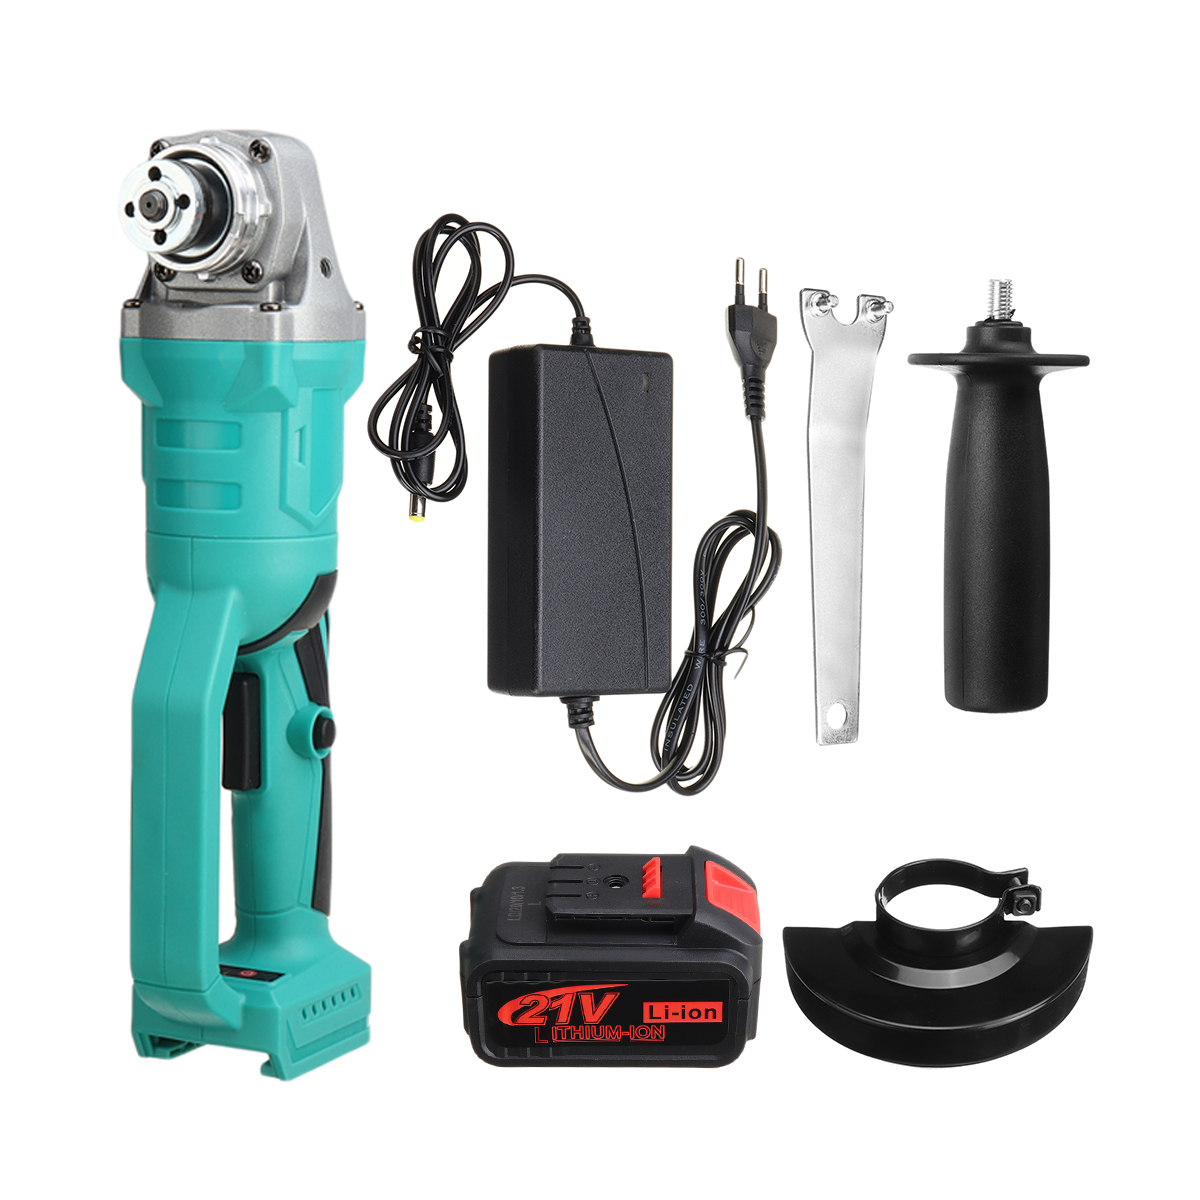 100mm-Cordless-Electric-Angle-Grinder-15000MAH-12-Lithium-Batteries-Brushless-Grinding-Machine-For-P-1882246-1